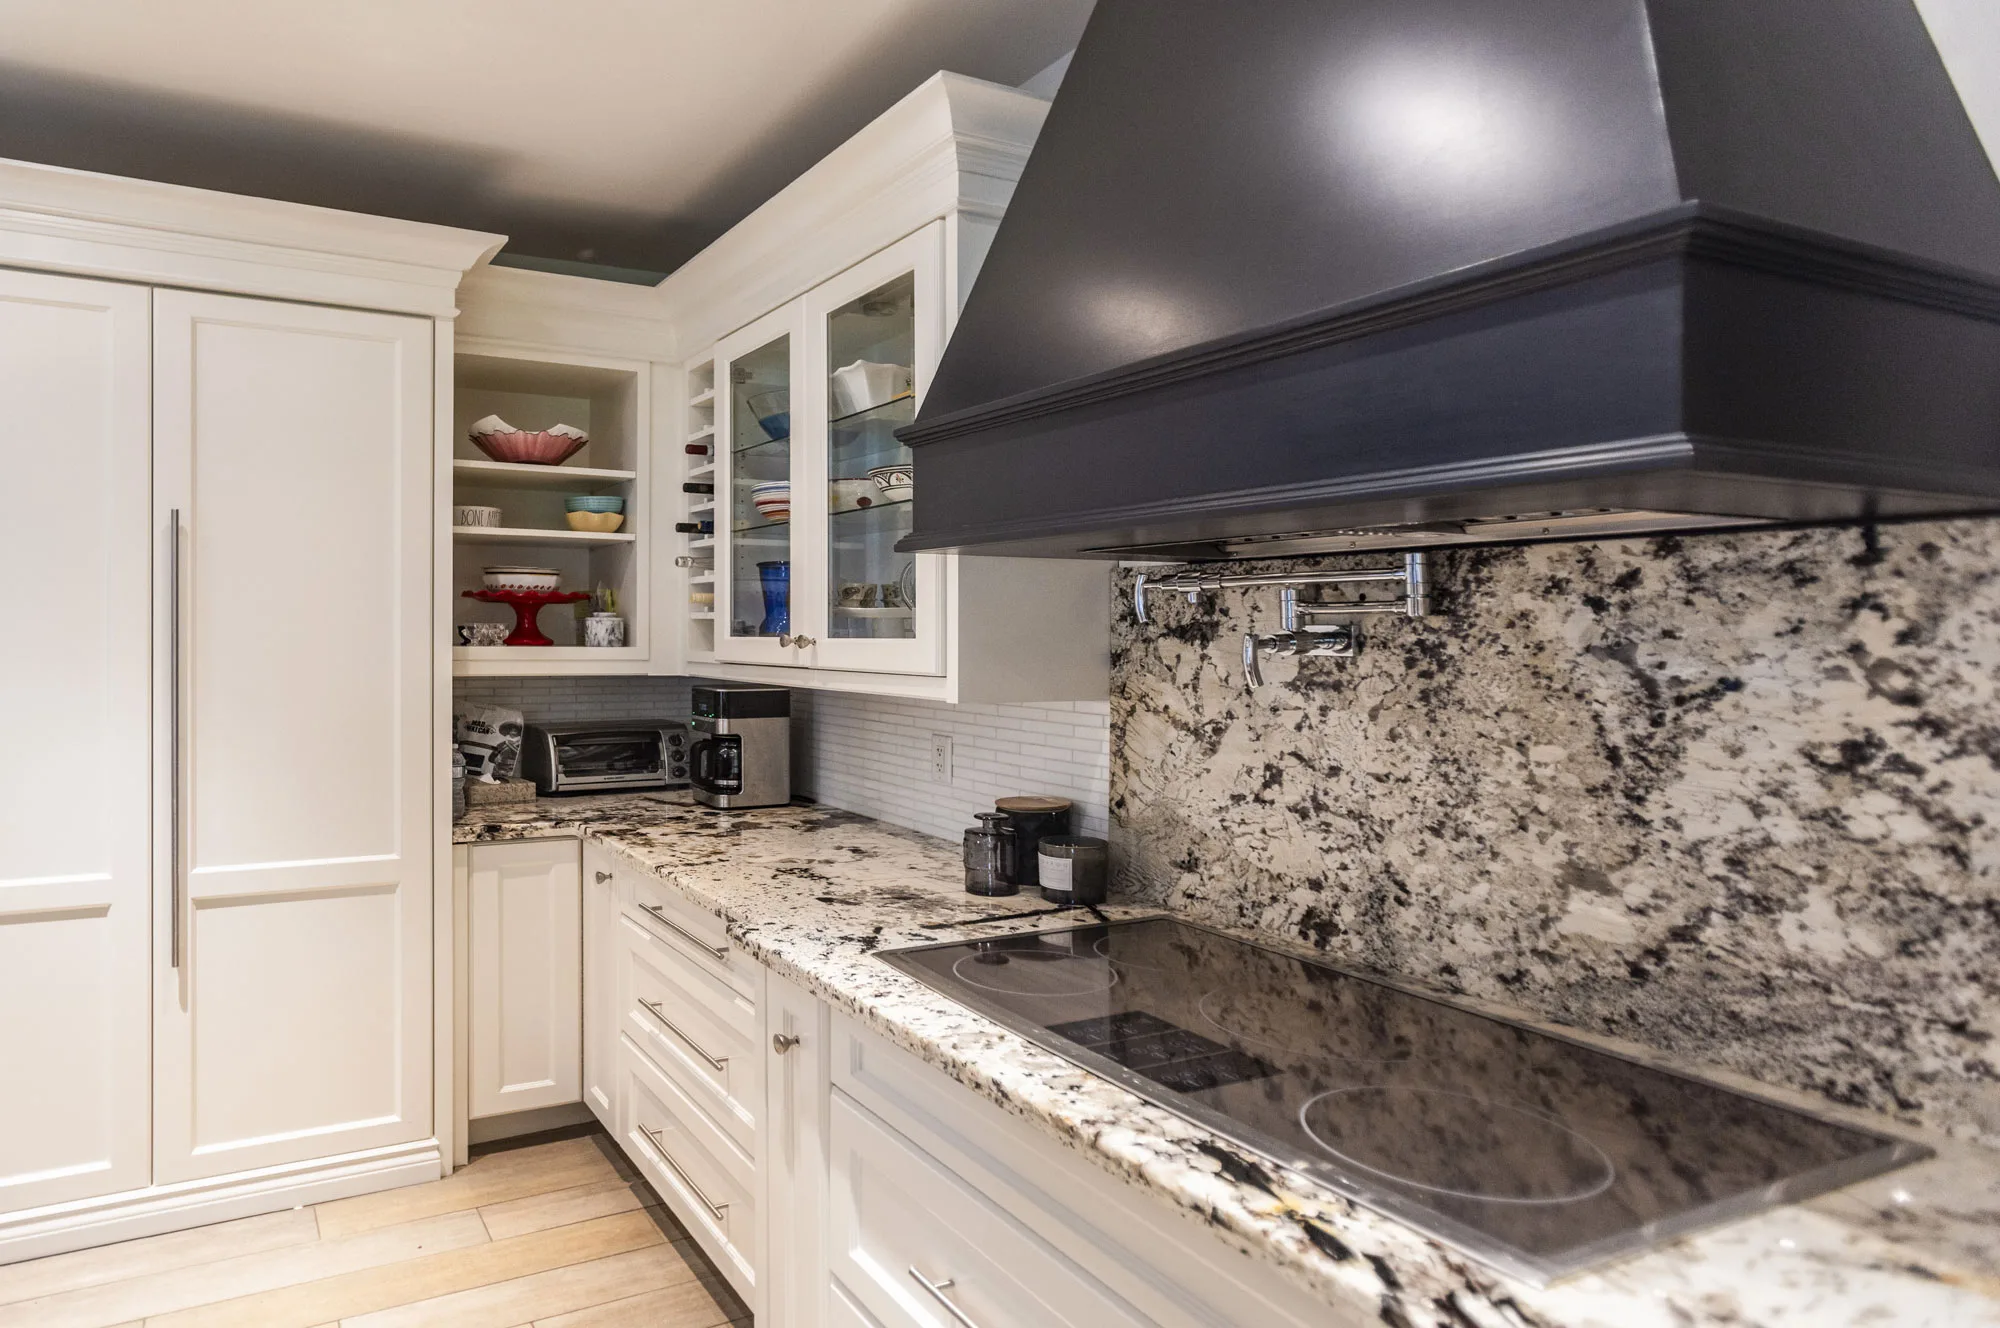 a close up of a side view of a kitchen with white cabinets and grey and black speckled granite counter top and back splash